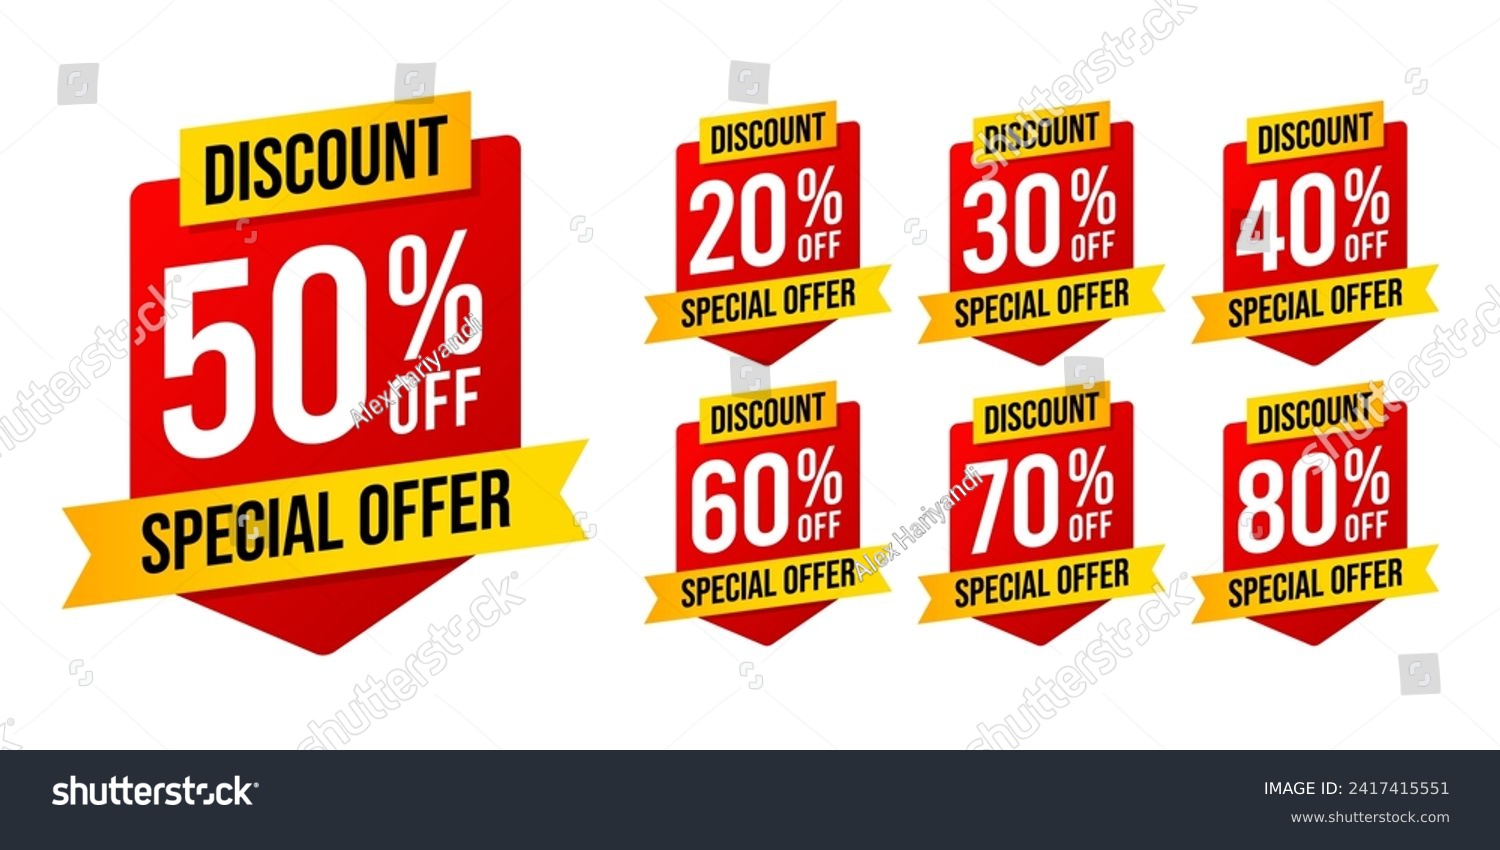 SVG of Special offer discounts label starting from 20, 30, 40, 50, 60, 70, 80 percent off. Trendy red and yellow color sales promotion banner element. Vector illustration svg